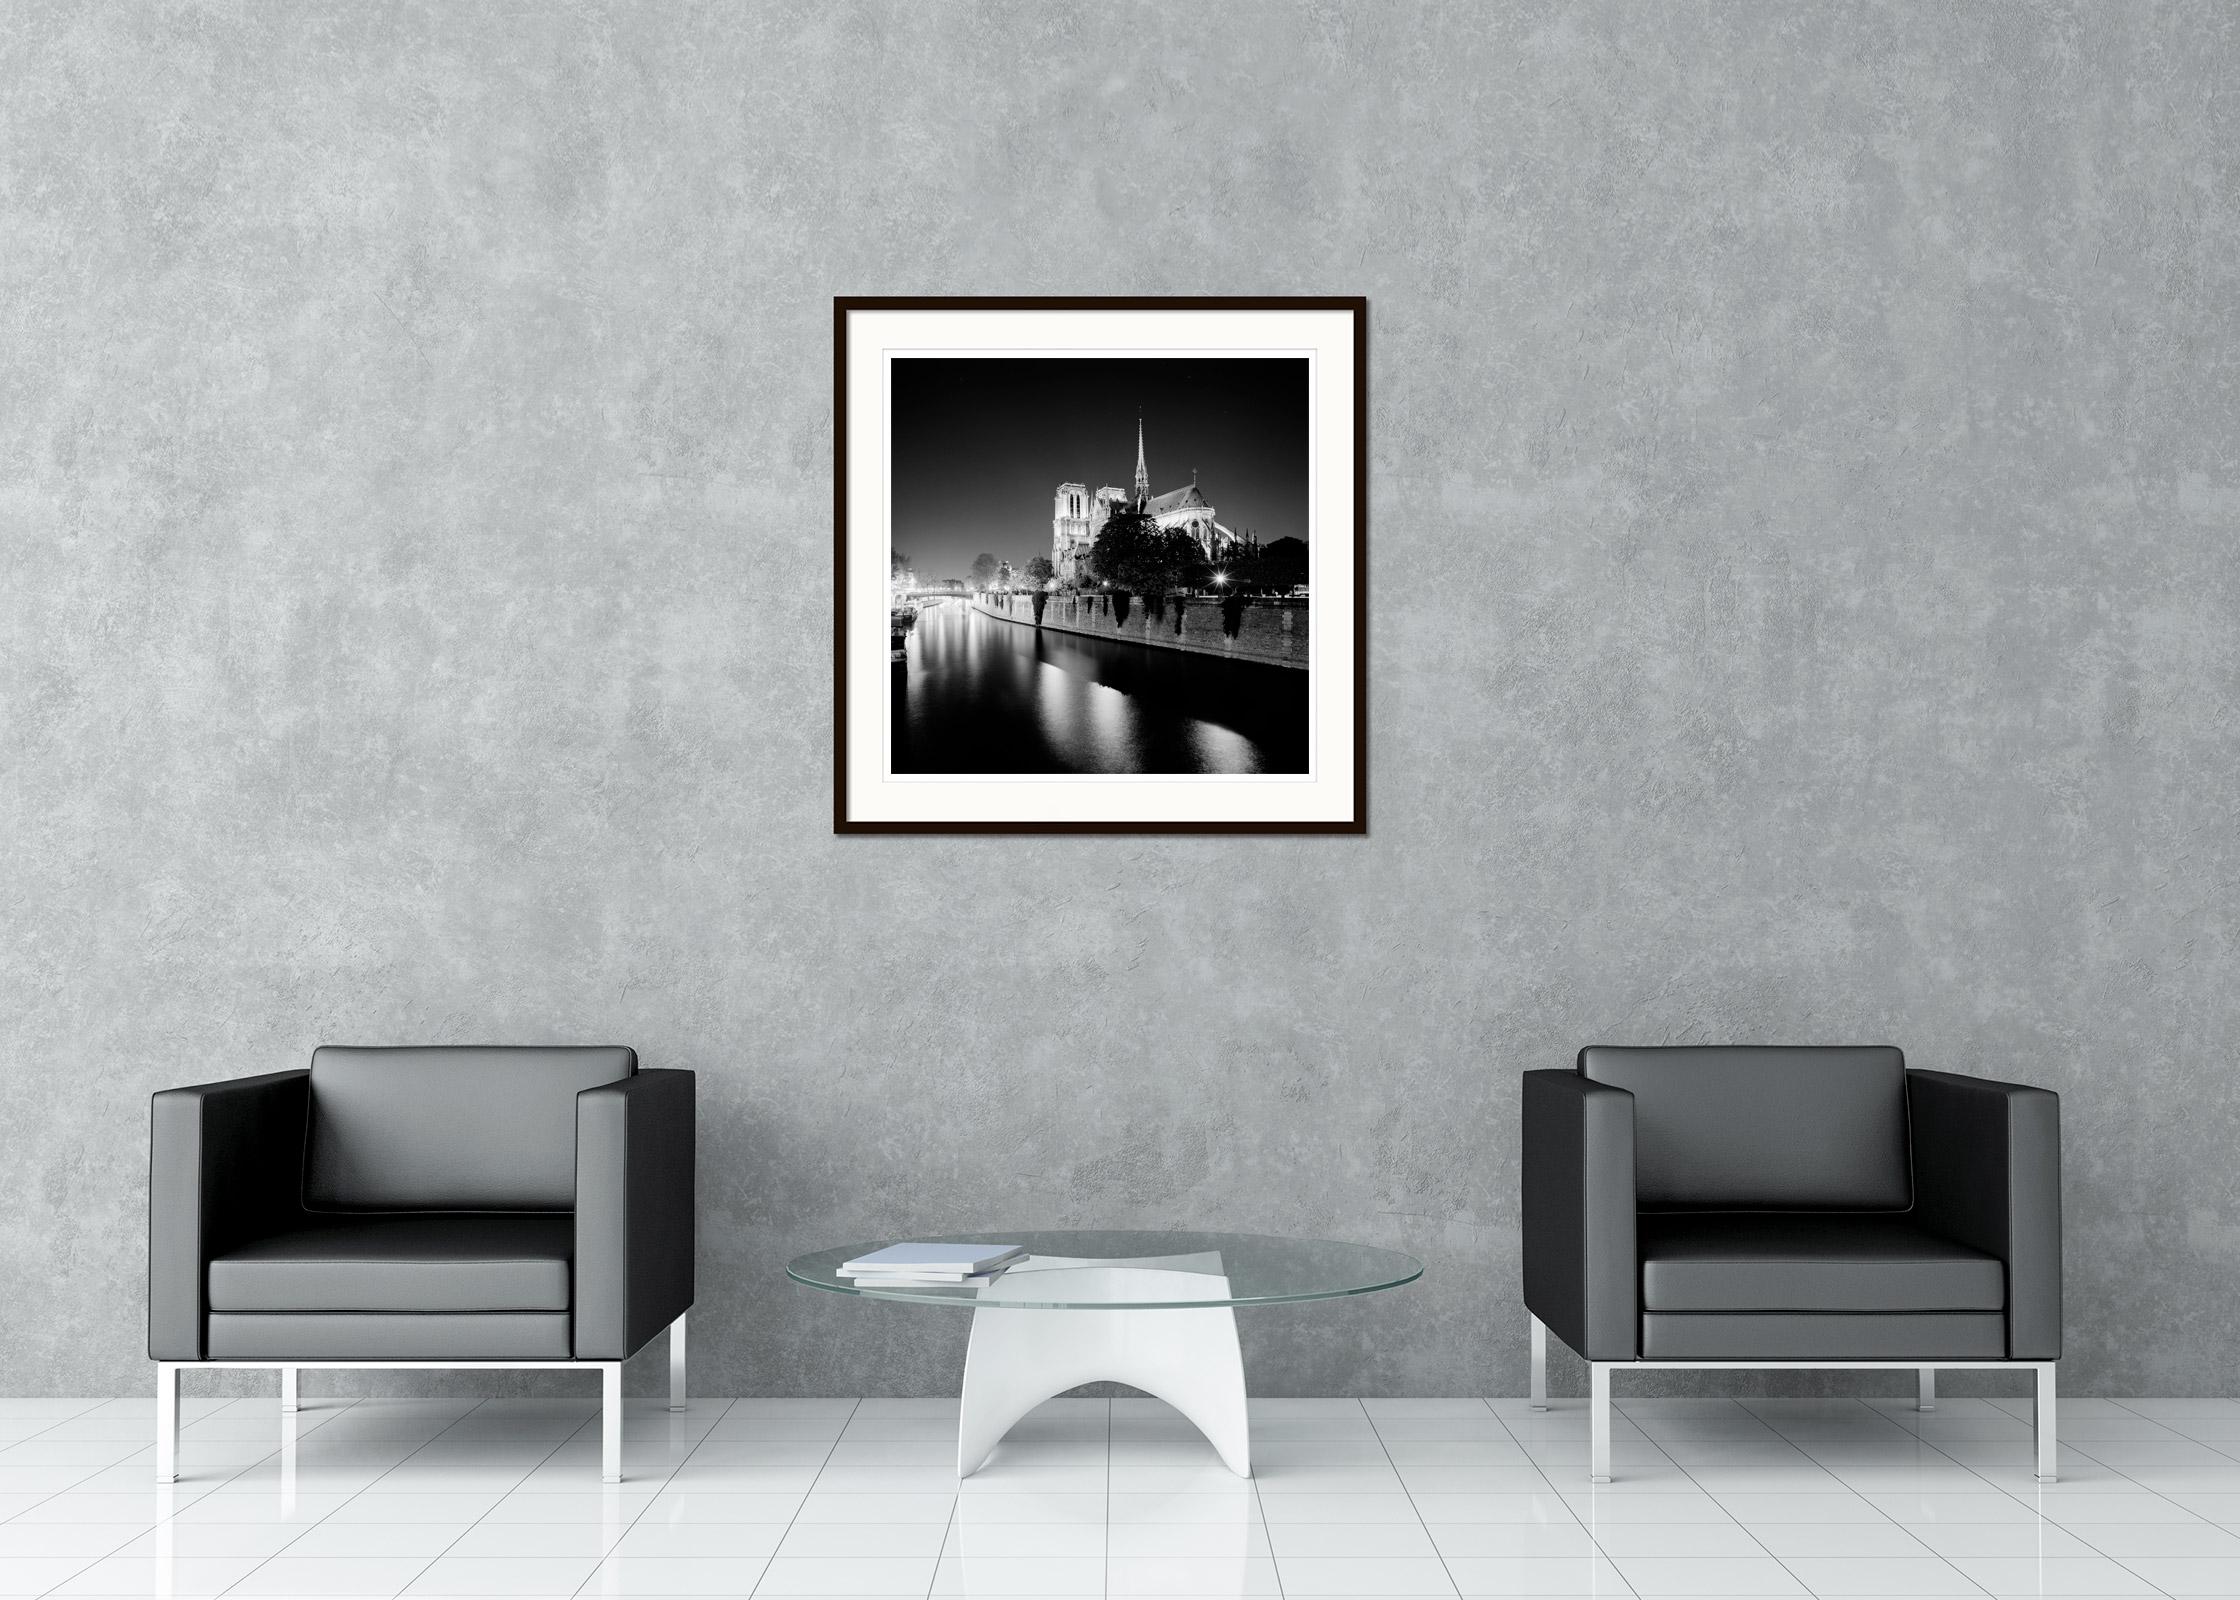 Black and White Fine Art Landscape Photography. Archival pigment ink print, edition of 9. Signed, titled, dated and numbered by artist. Certificate of authenticity included. Printed with 4cm white border.
International award winner photographer -